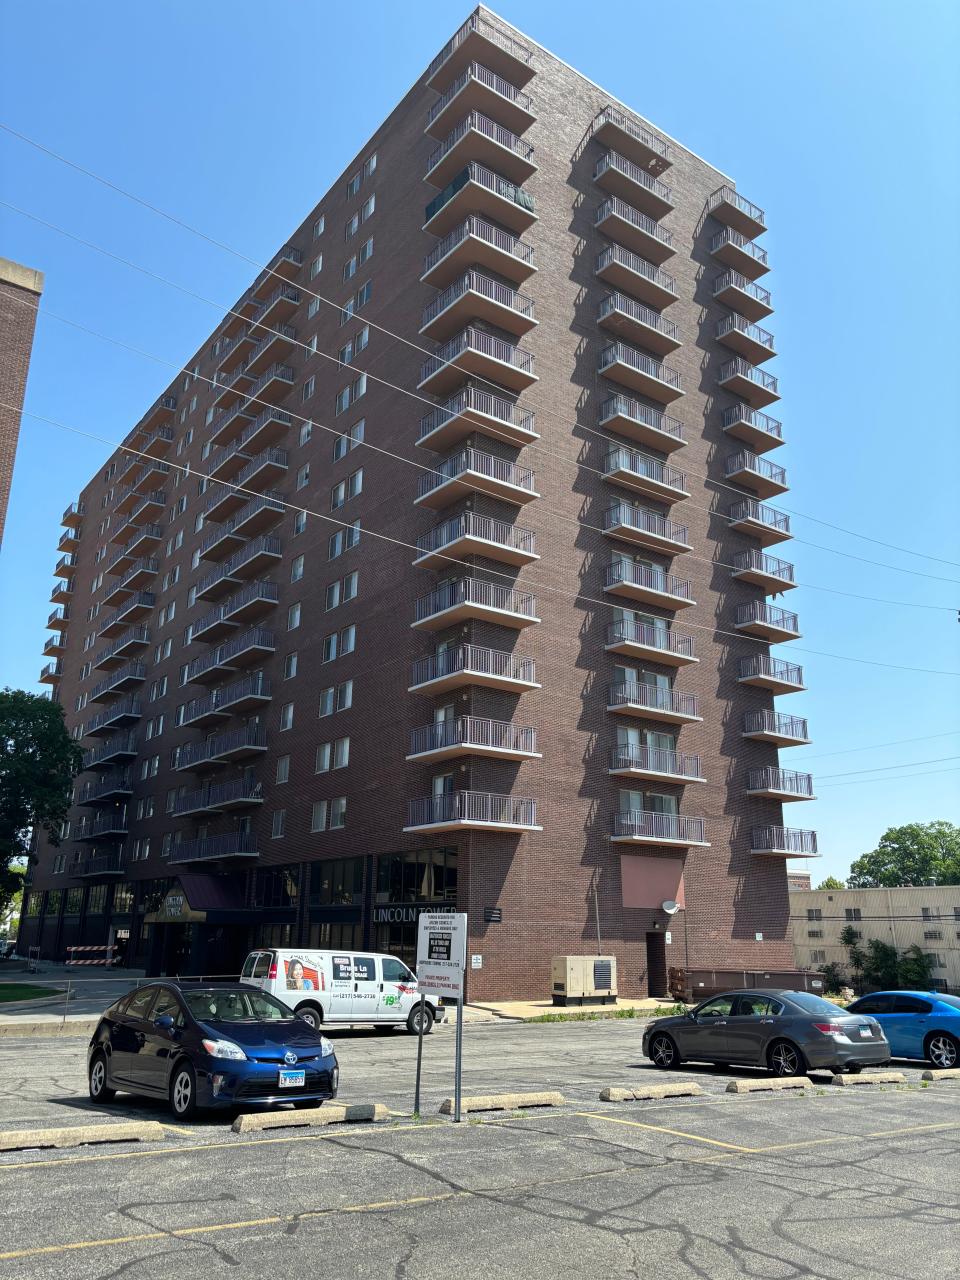 Lincoln Tower Apartment building sits at 520 S. Second St. in downtown Springfield on May 19, 2024. The 17-story residence opened in 1968, but its owner, Strategic Property Services Group LLC, is in bankruptcy and city of Springfield has two court cases against it.